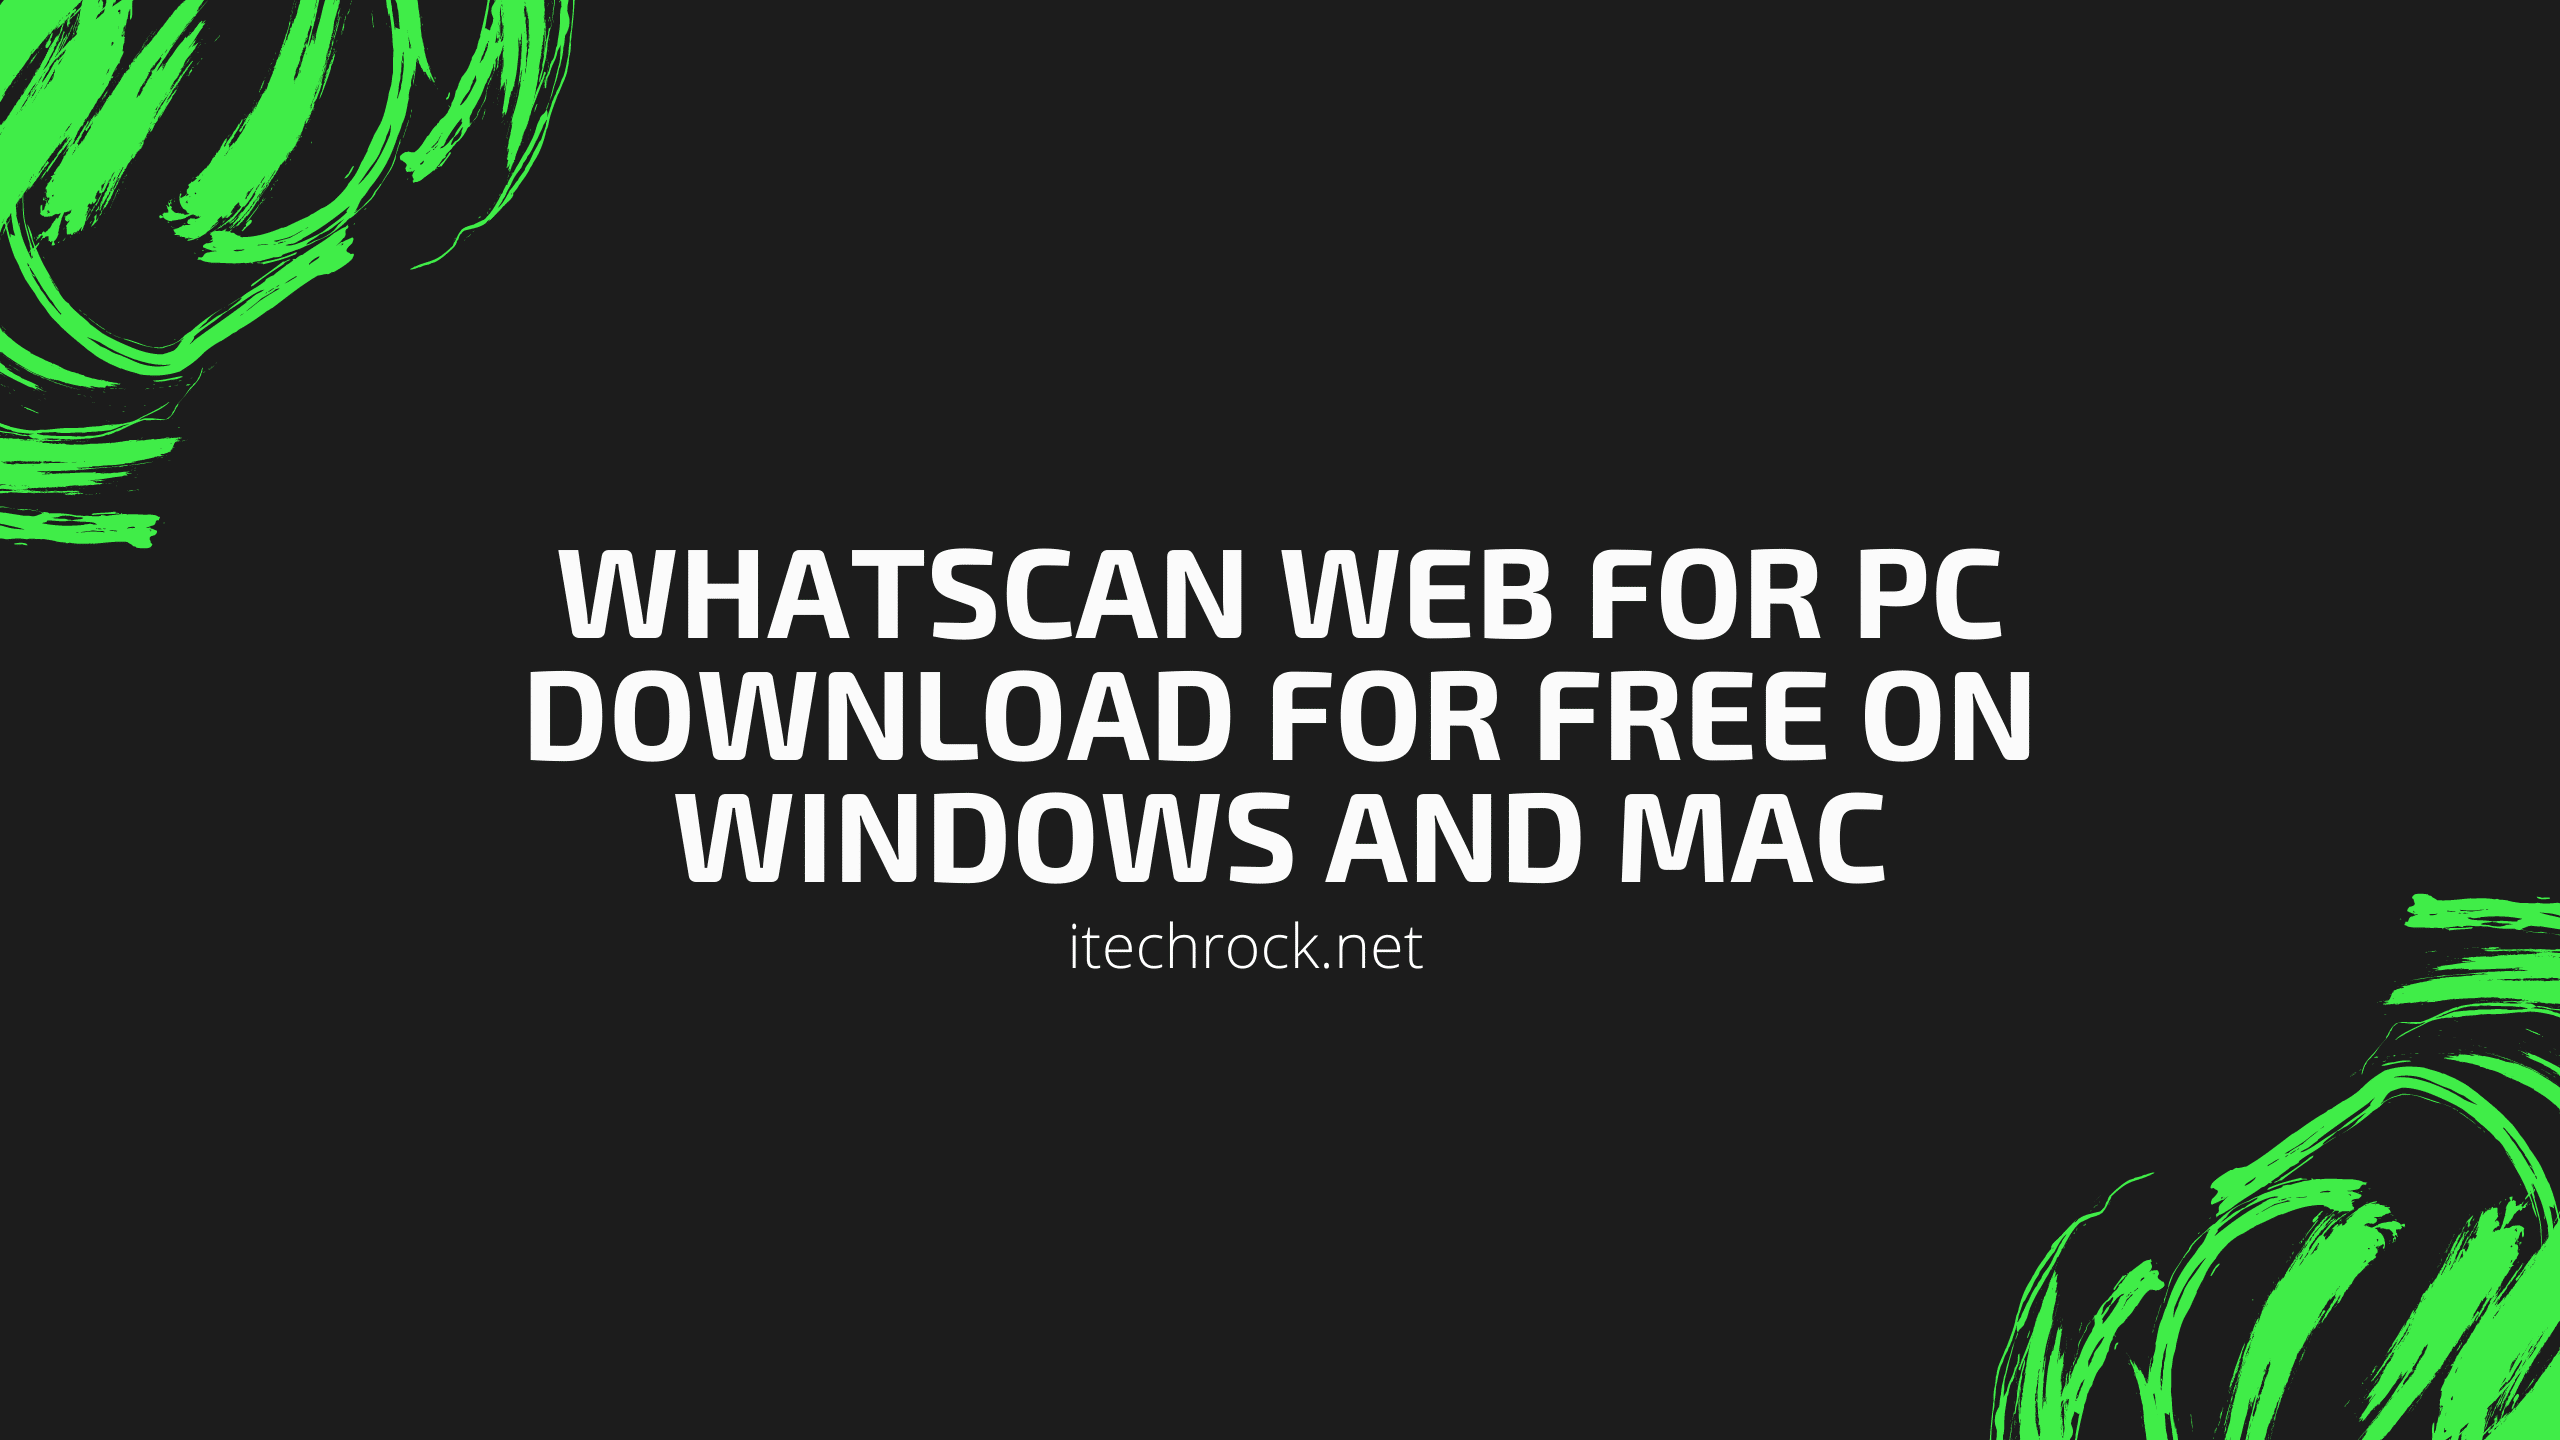 WhatScan Web for PC Download for Free on Windows and Mac